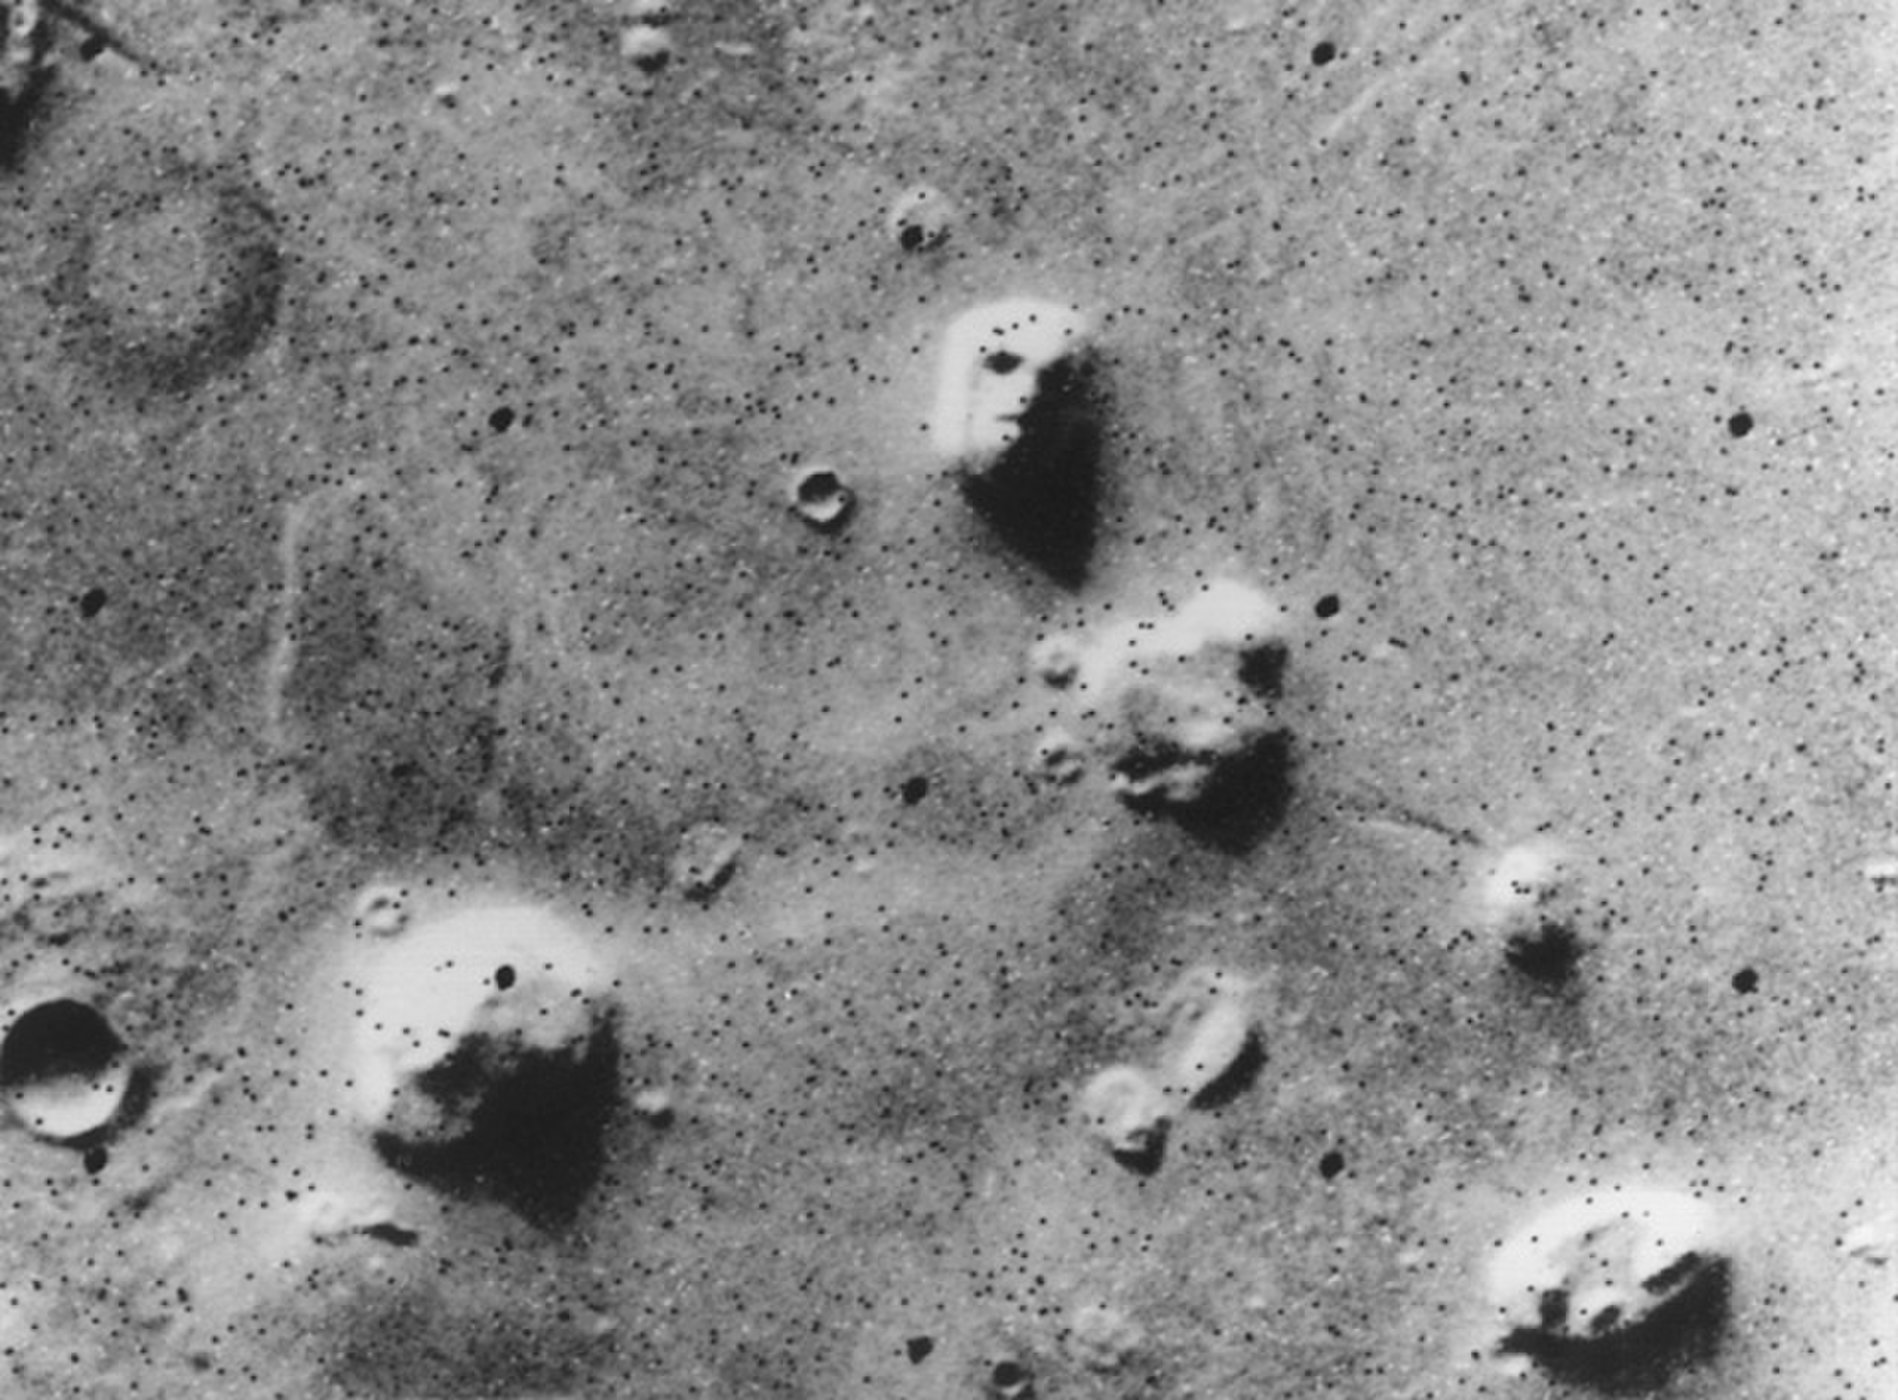 The Face on Mars captured by Viking Orbiter 1’s camera in 1976.